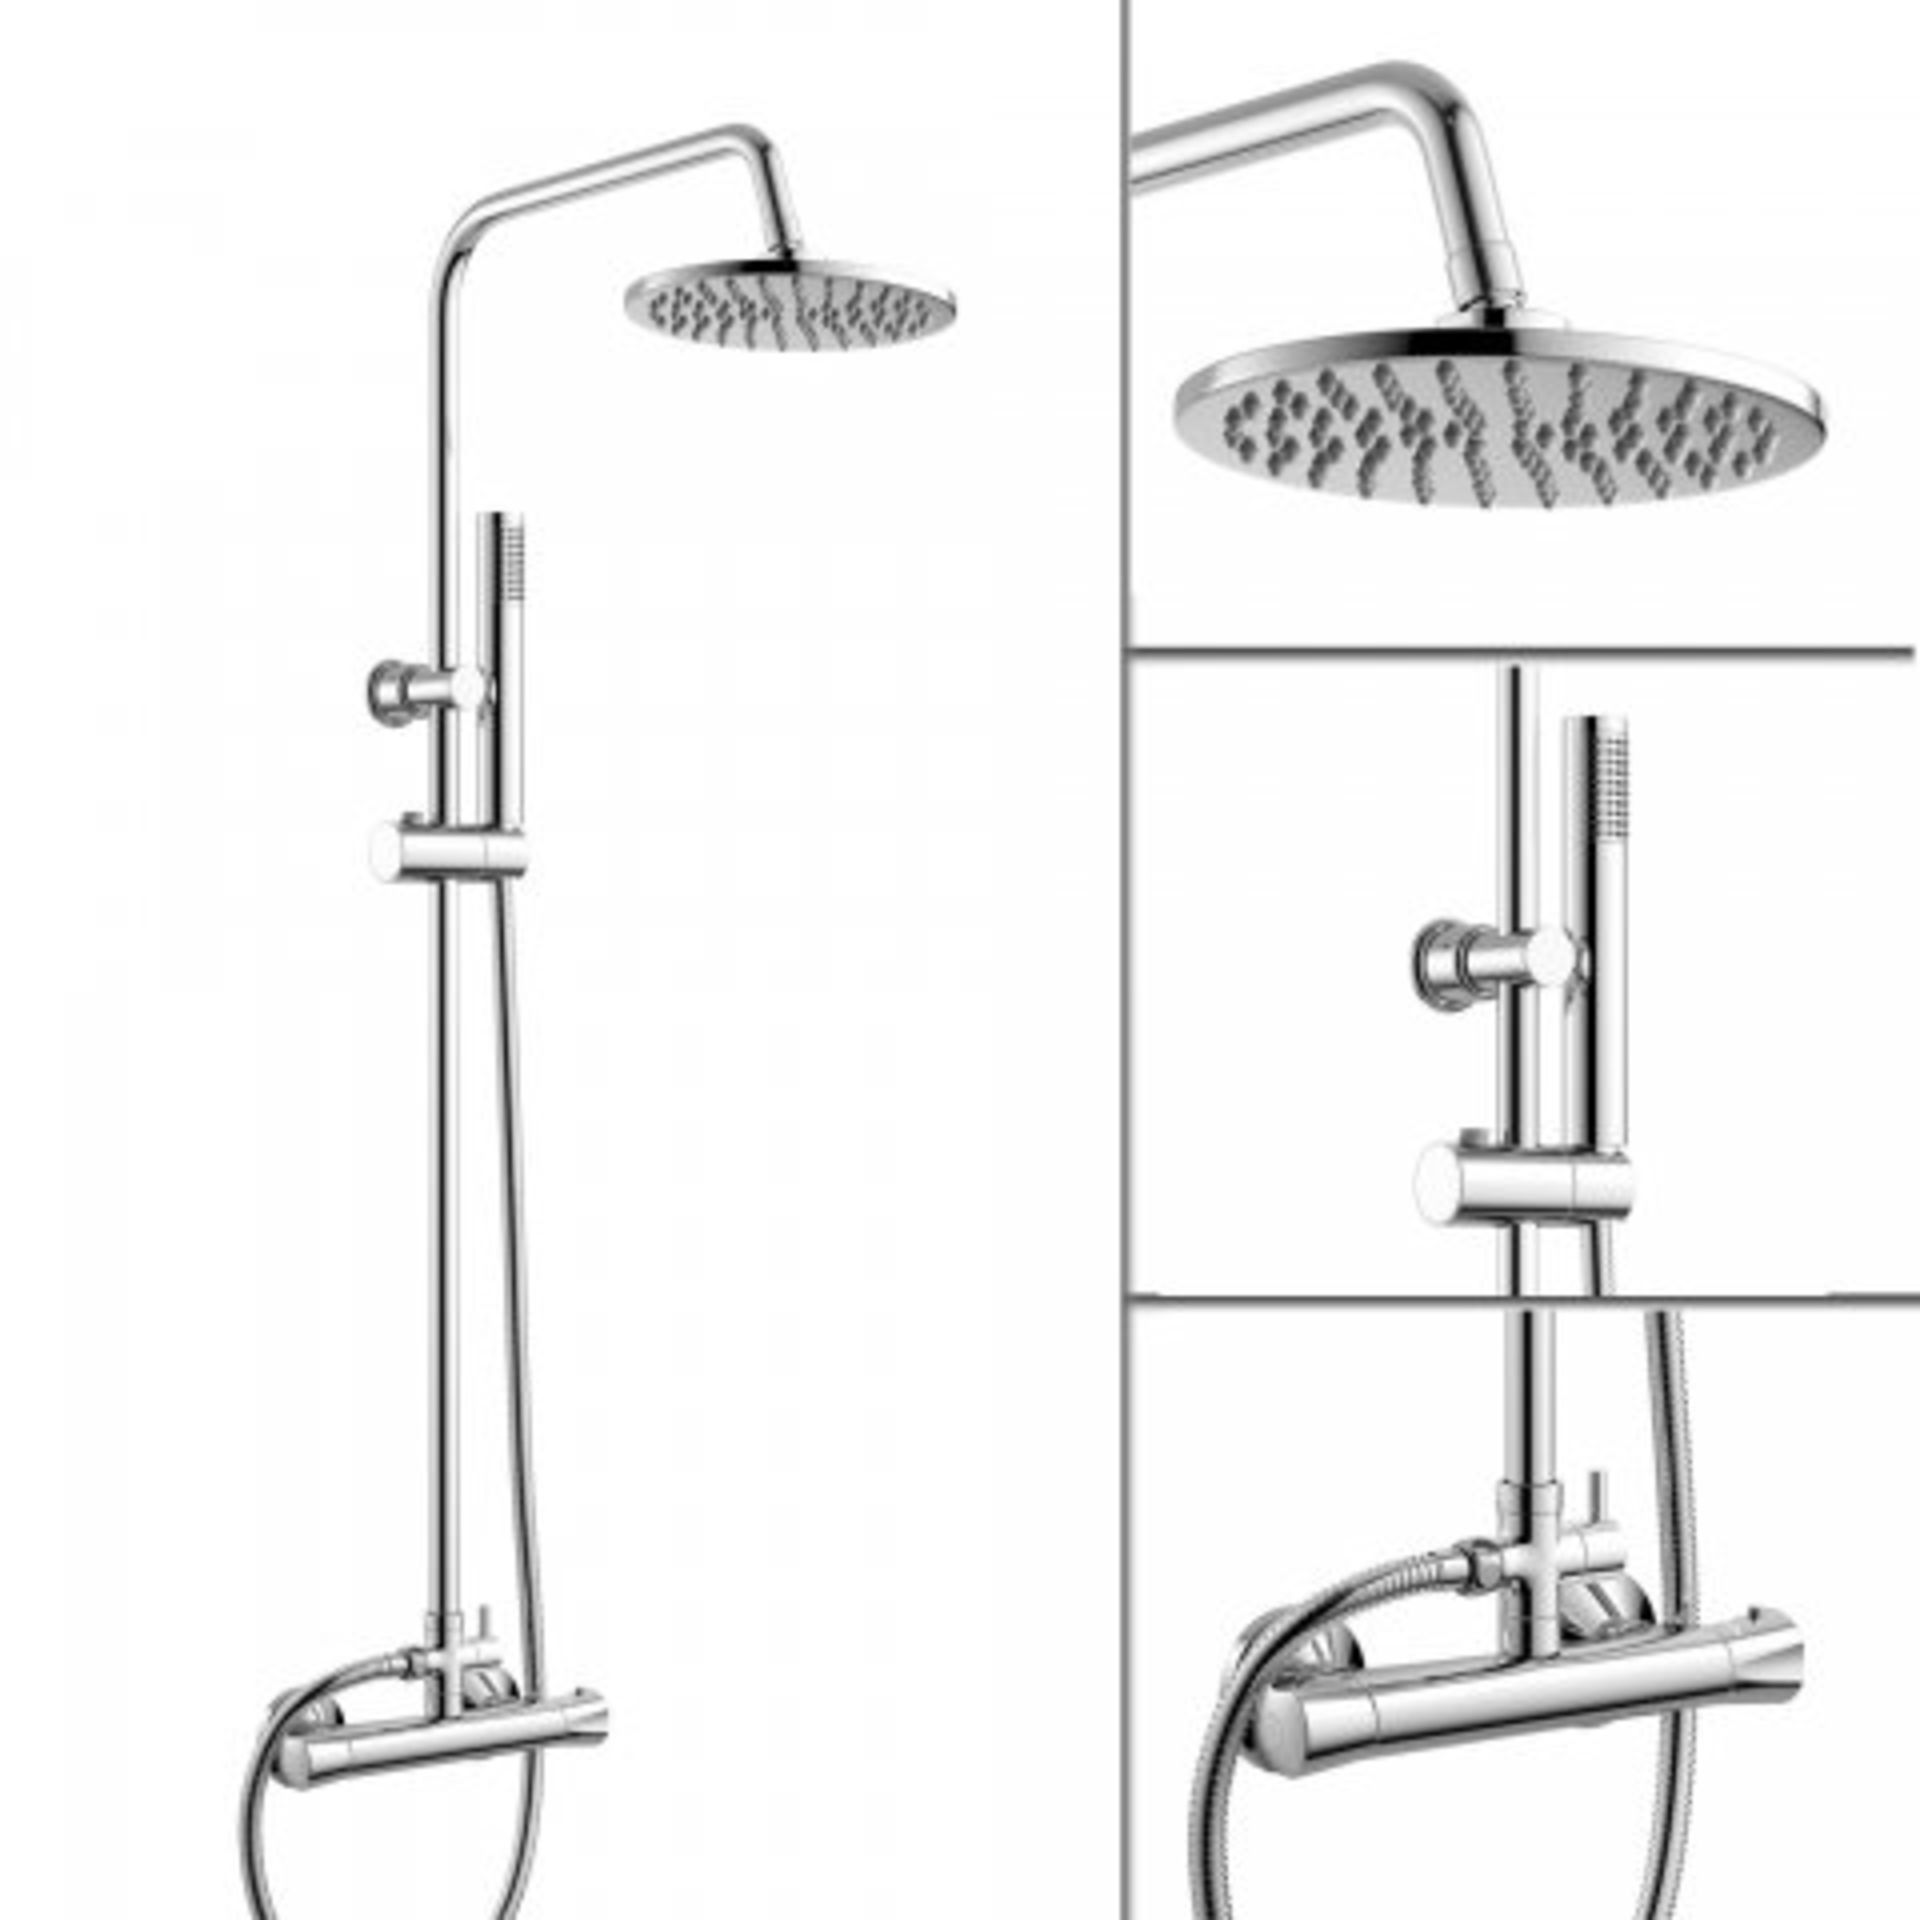 (P21) 200mm Round Head Thermostatic Exposed Shower Kit & Hand Held. RRP £249.99. Simplistic Style - Image 3 of 5